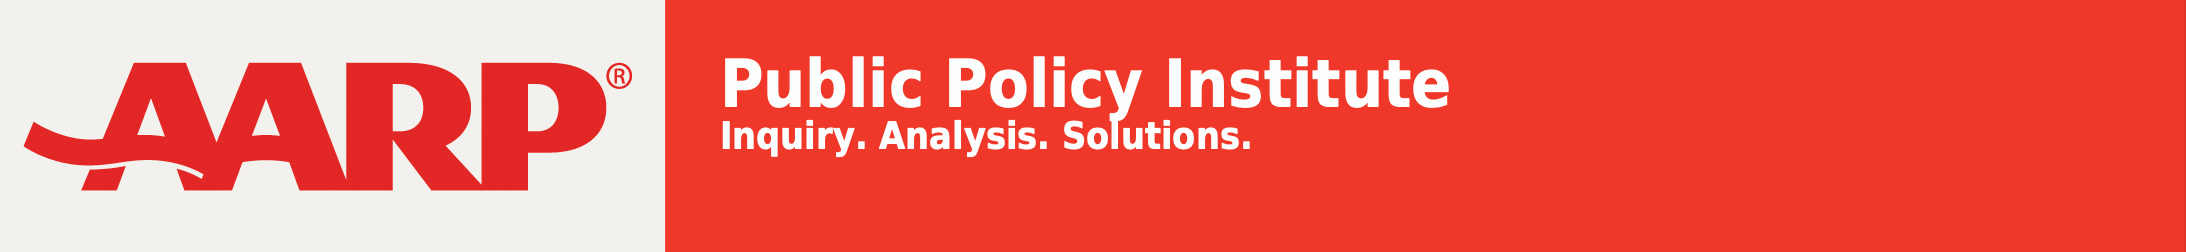 AARP - Real Possibilities. Public Policy Institute. Inquiry. Analysis. Solutions.